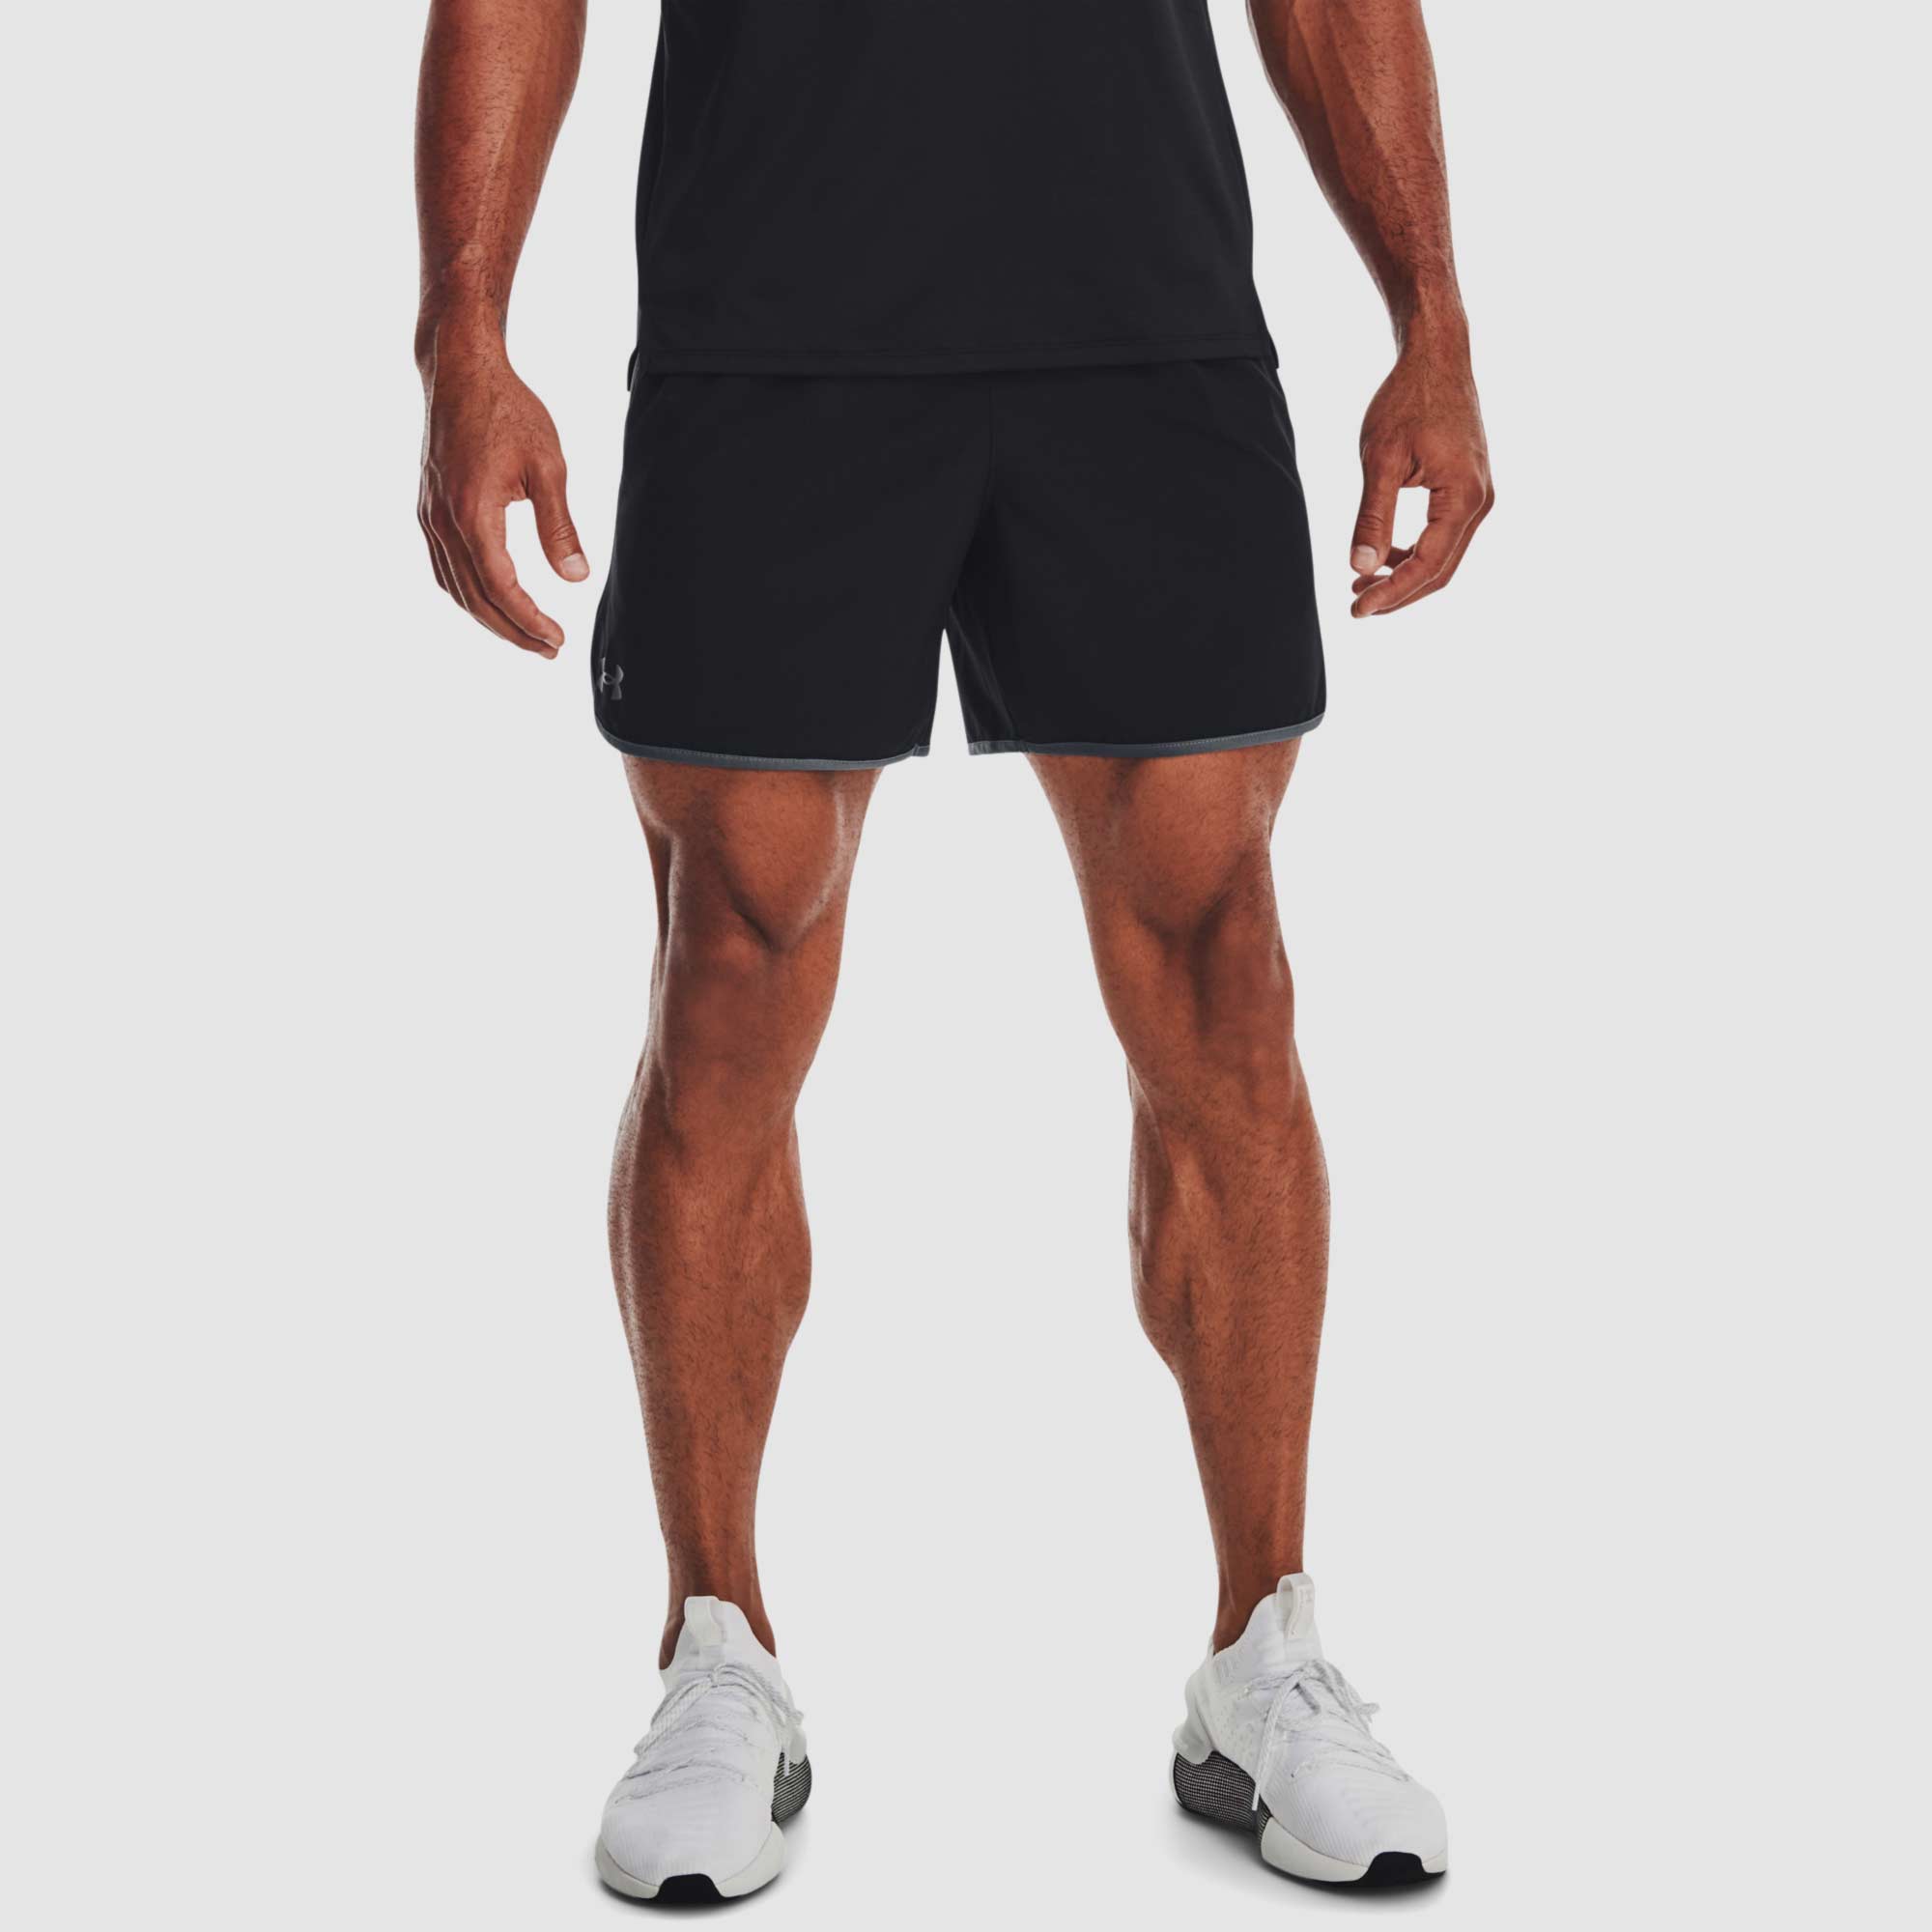 Under Armour Mens HIIT Woven 6 Inch Short